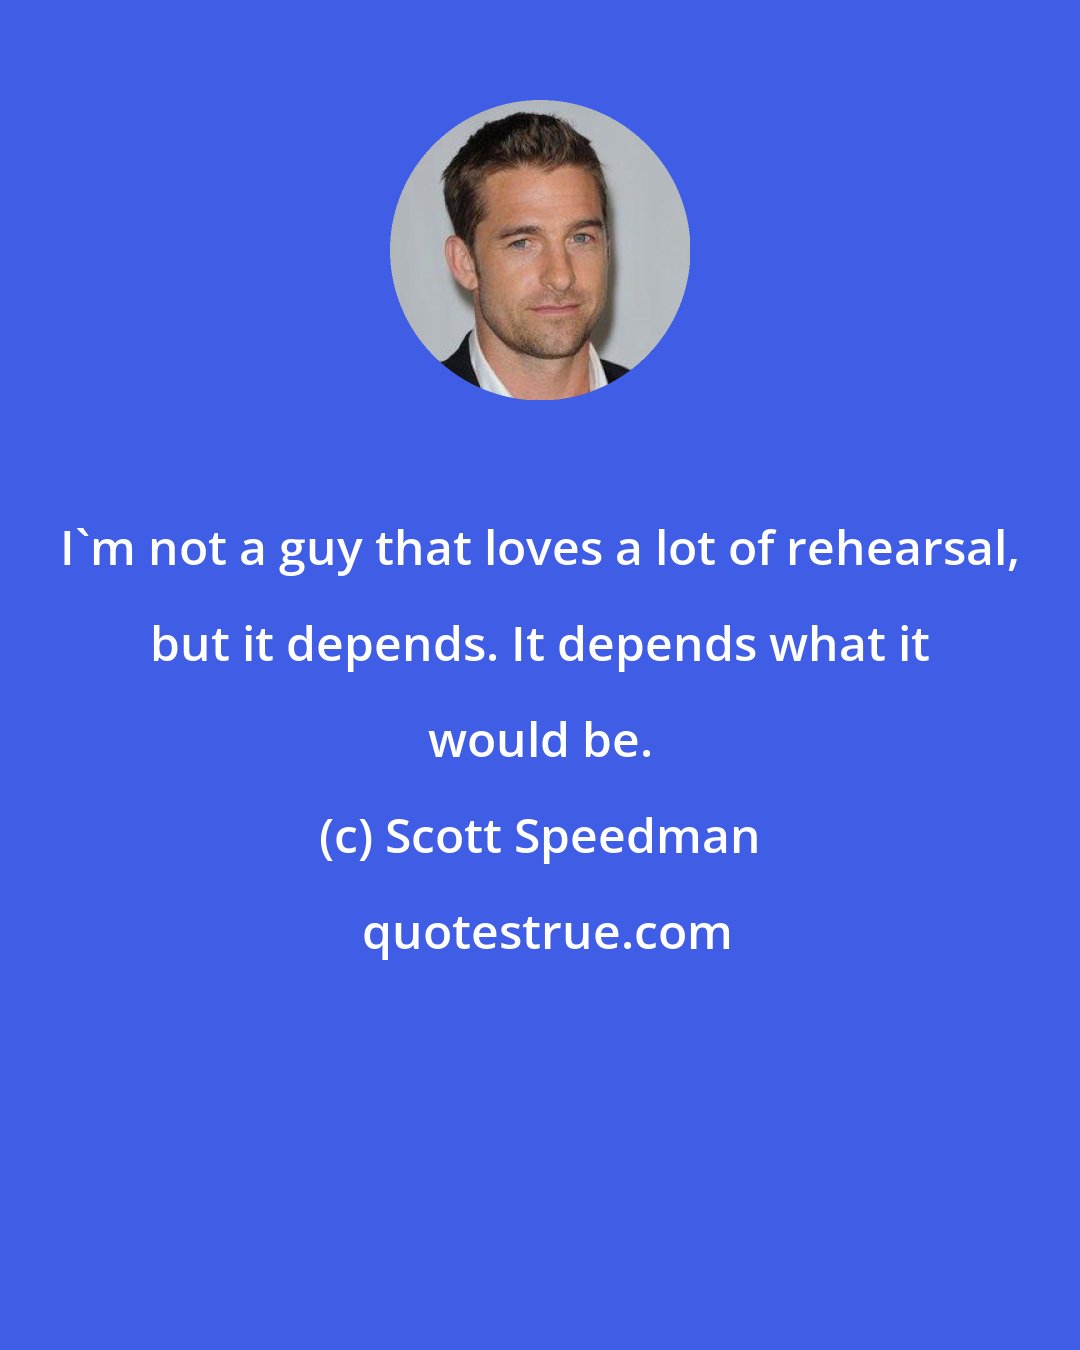 Scott Speedman: I'm not a guy that loves a lot of rehearsal, but it depends. It depends what it would be.